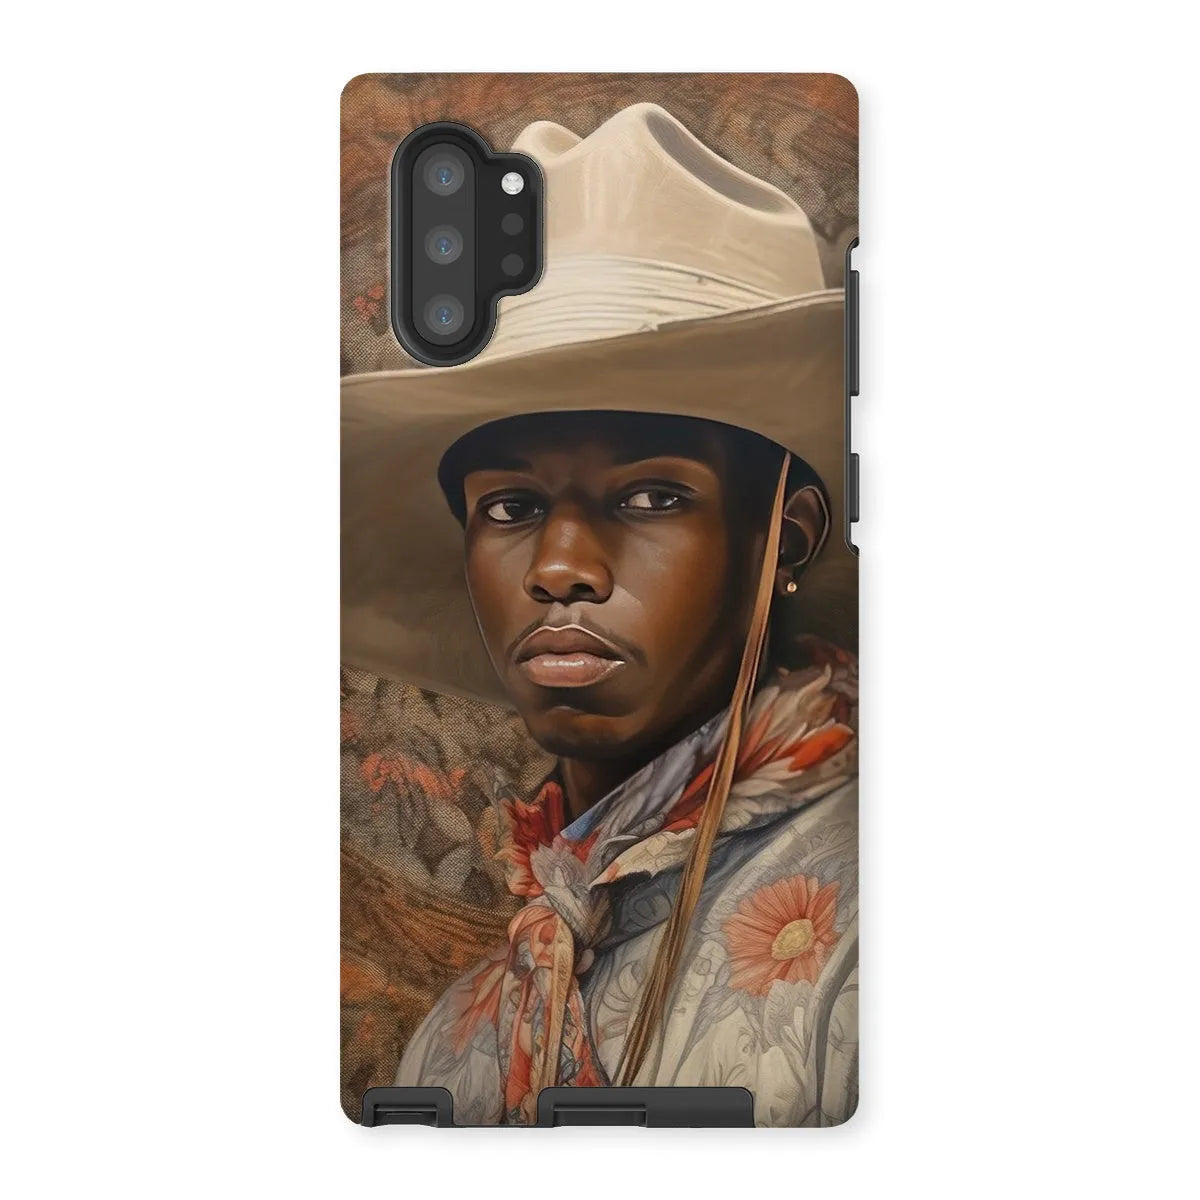 Titus The Gay Cowboy - Dandy Gay Men Art Phone Case - Samsung Galaxy Note 10p / Matte - Mobile Phone Cases - Aesthetic